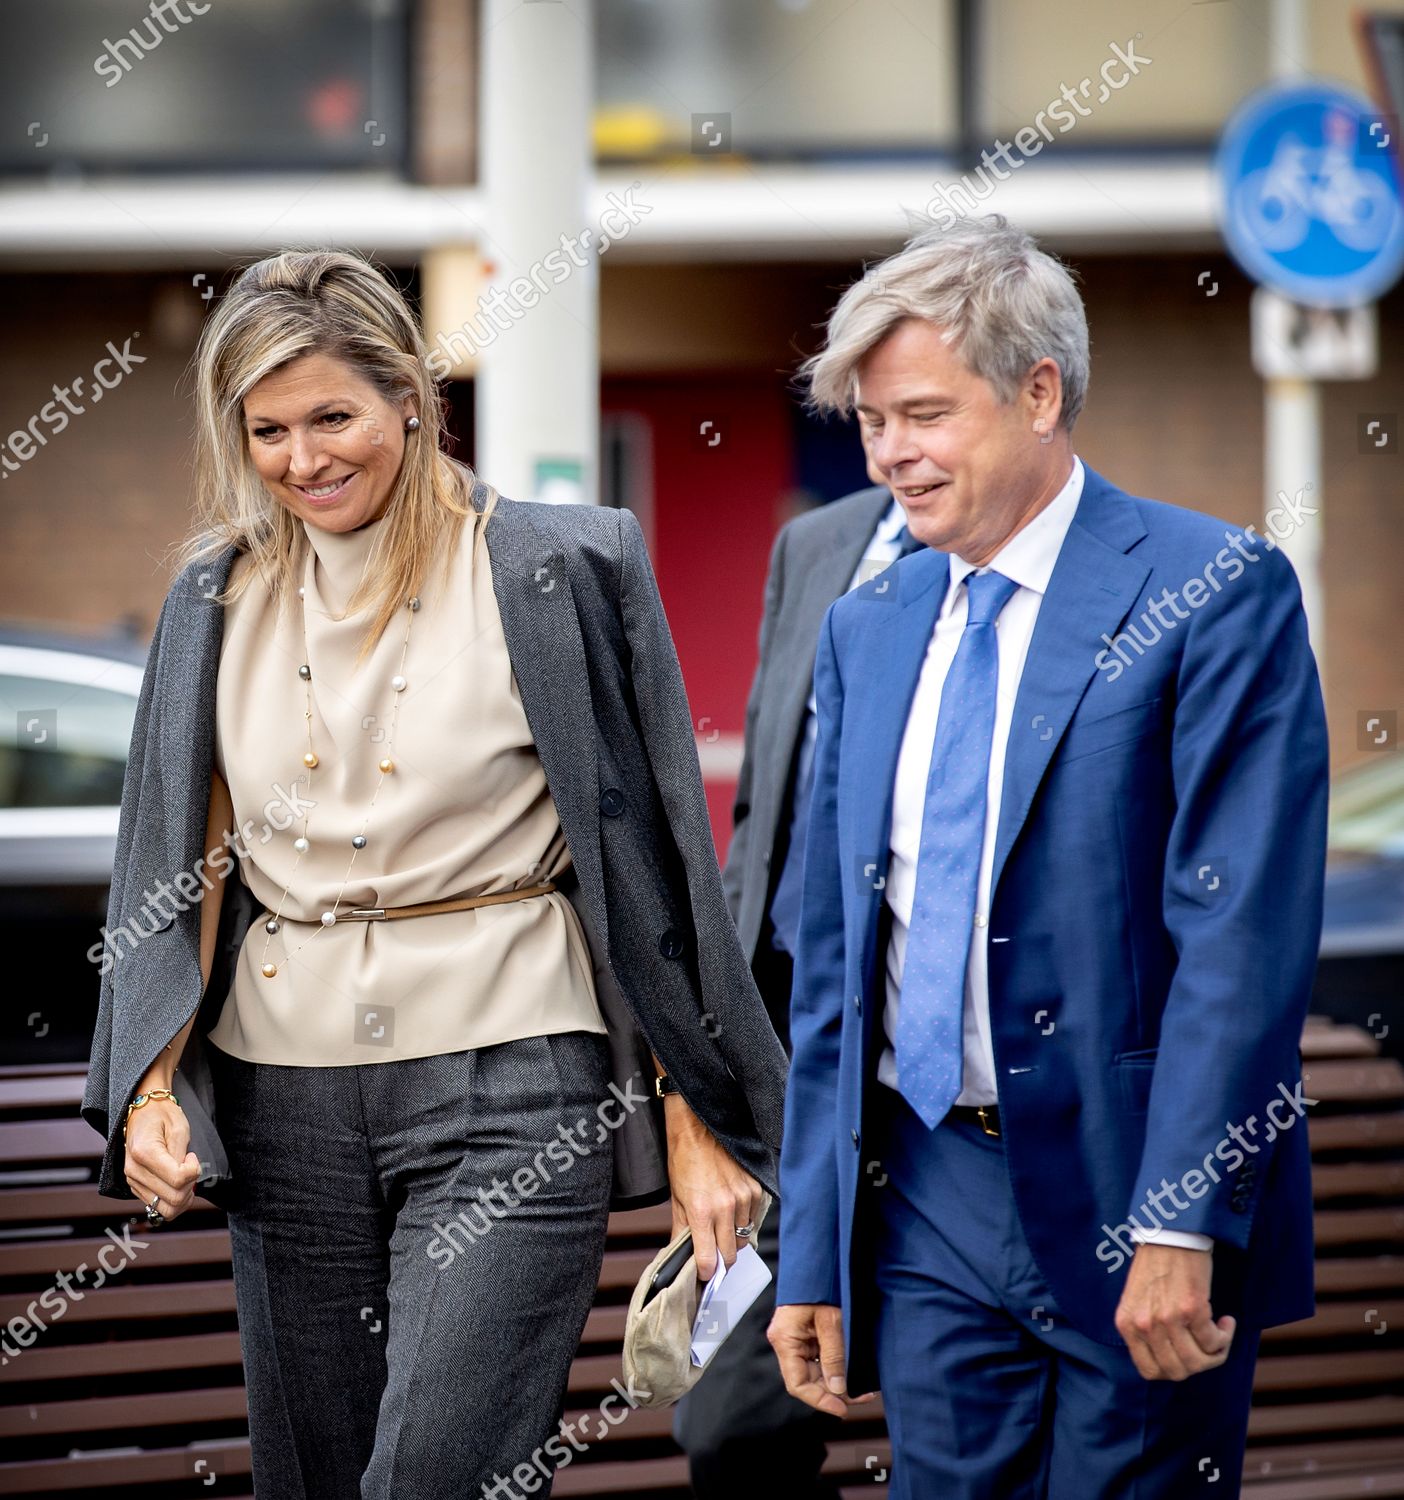 queen-maxima-visit-to-the-parnassia-group-the-hague-the-netherlands-shutterstock-editorial-10675389e.jpg